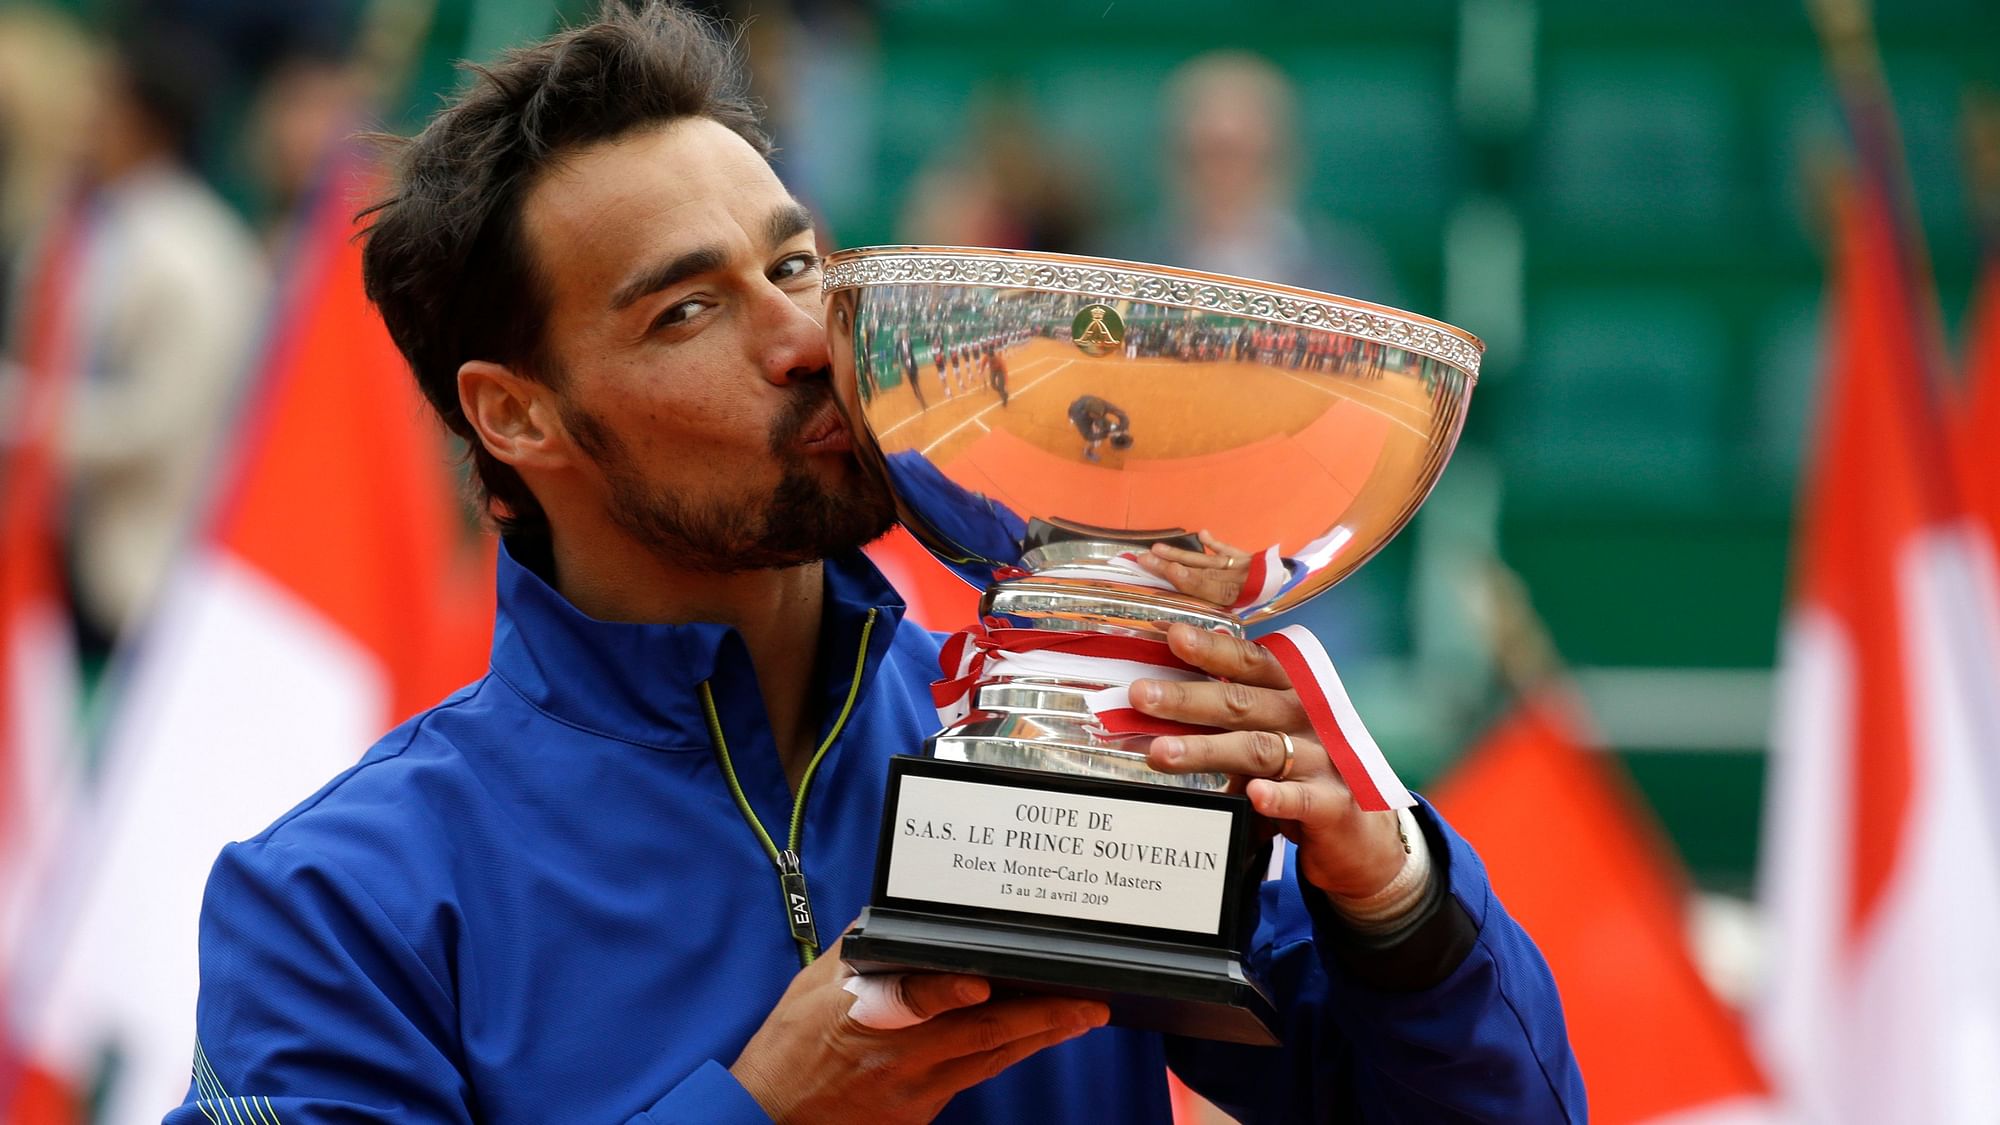 Italy’s Fabio Fognini celebrates after defeating Serbia’s Dusan Lajovic in the men’s singles final match of the Monte Carlo Tennis Masters tournament in Monaco, Sunday, April, 21, 2019.&nbsp;